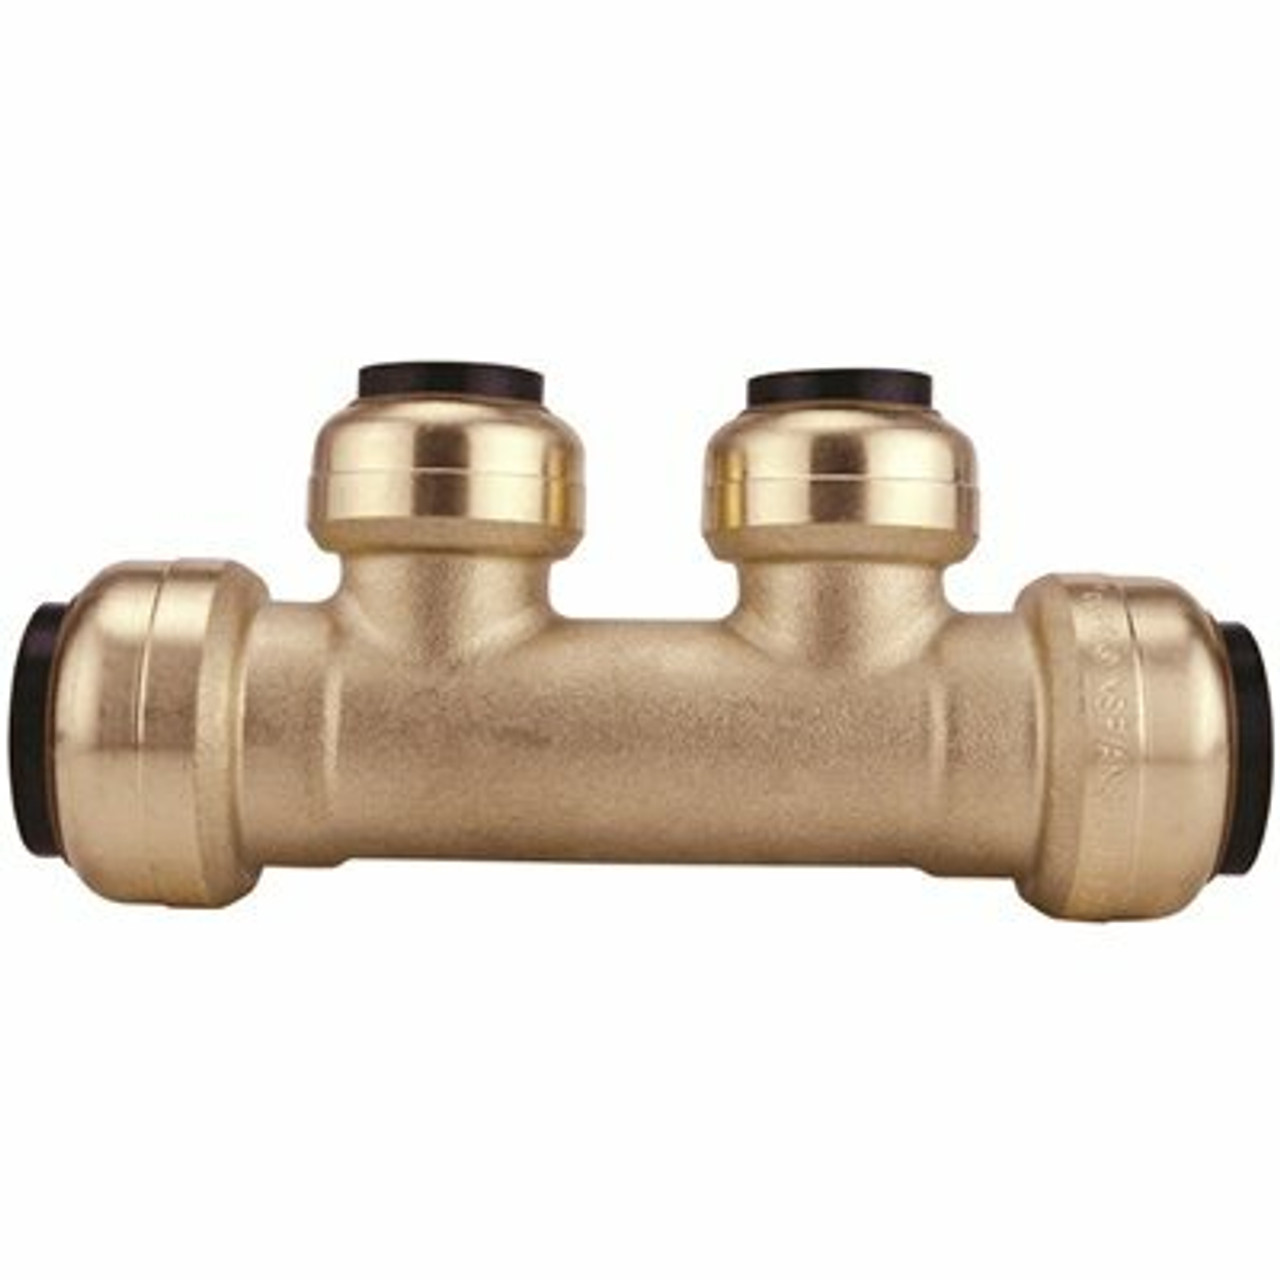 Tectite 3/4 In. X 3/4 In. Brass Push-To-Connect Inlets With 2-Port Open Manifold 1/2 In. Push-To-Connect Outlets